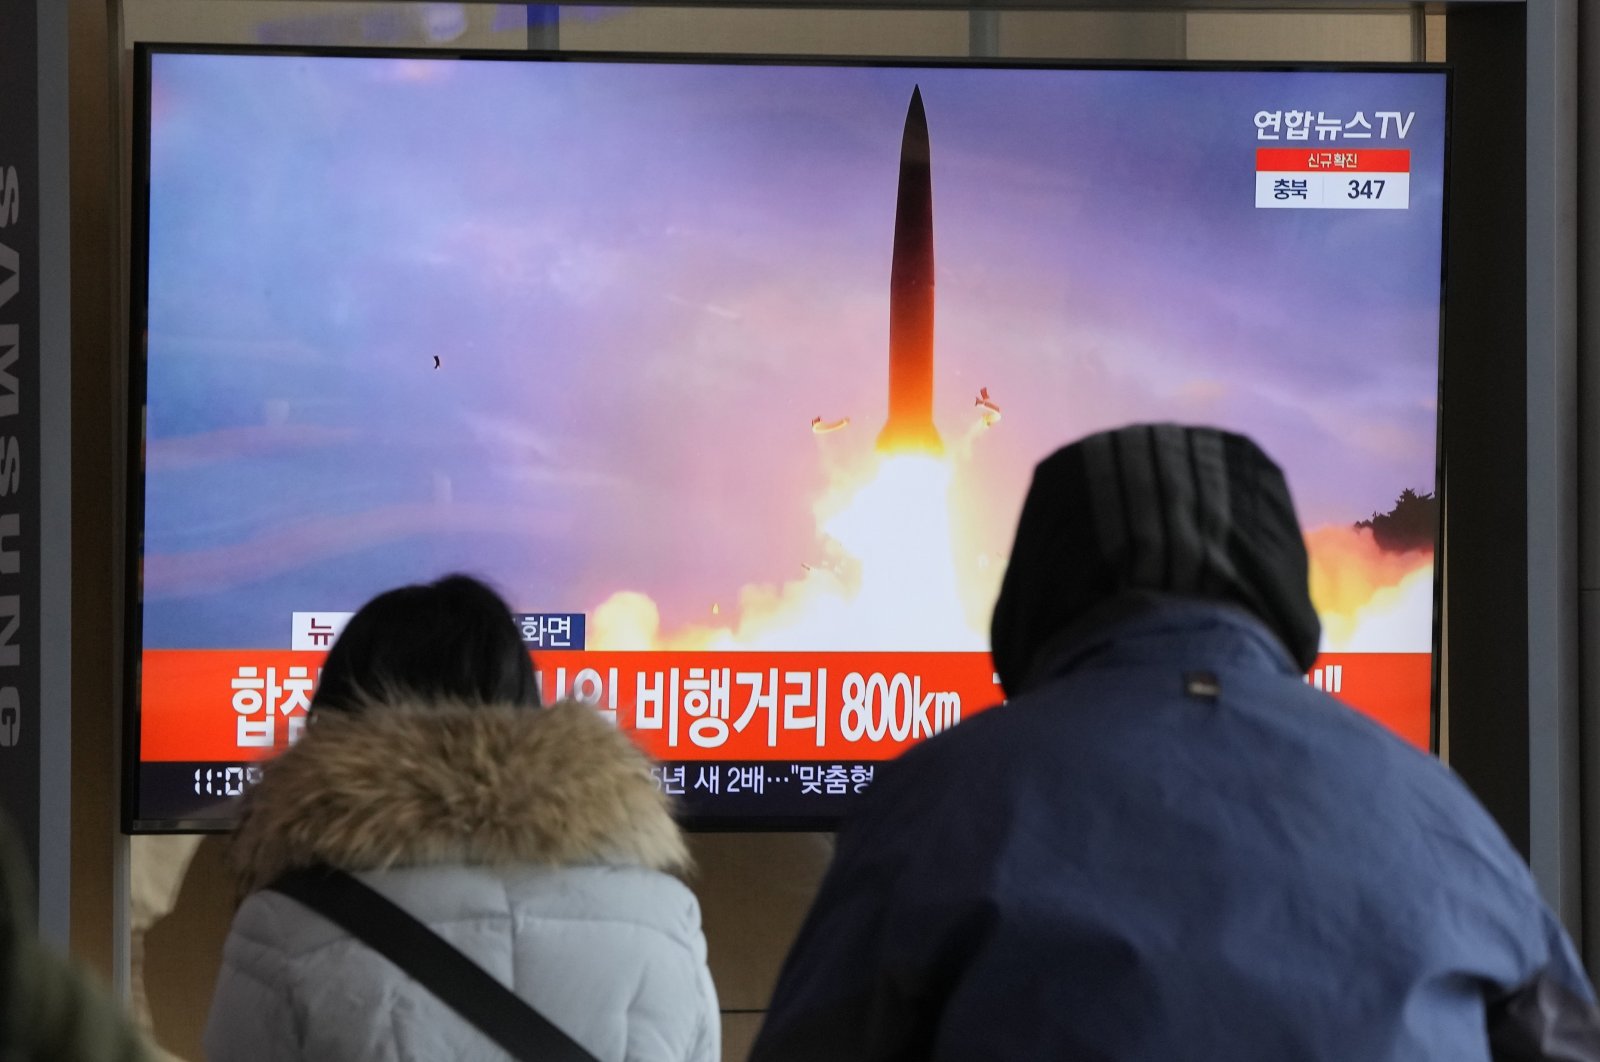 People watch a TV showing a file image of North Korea&#039;s missile launch during a news program at the Seoul Railway Station in Seoul, South Korea, Sunday, Jan. 30, 2022. (AP Photo)